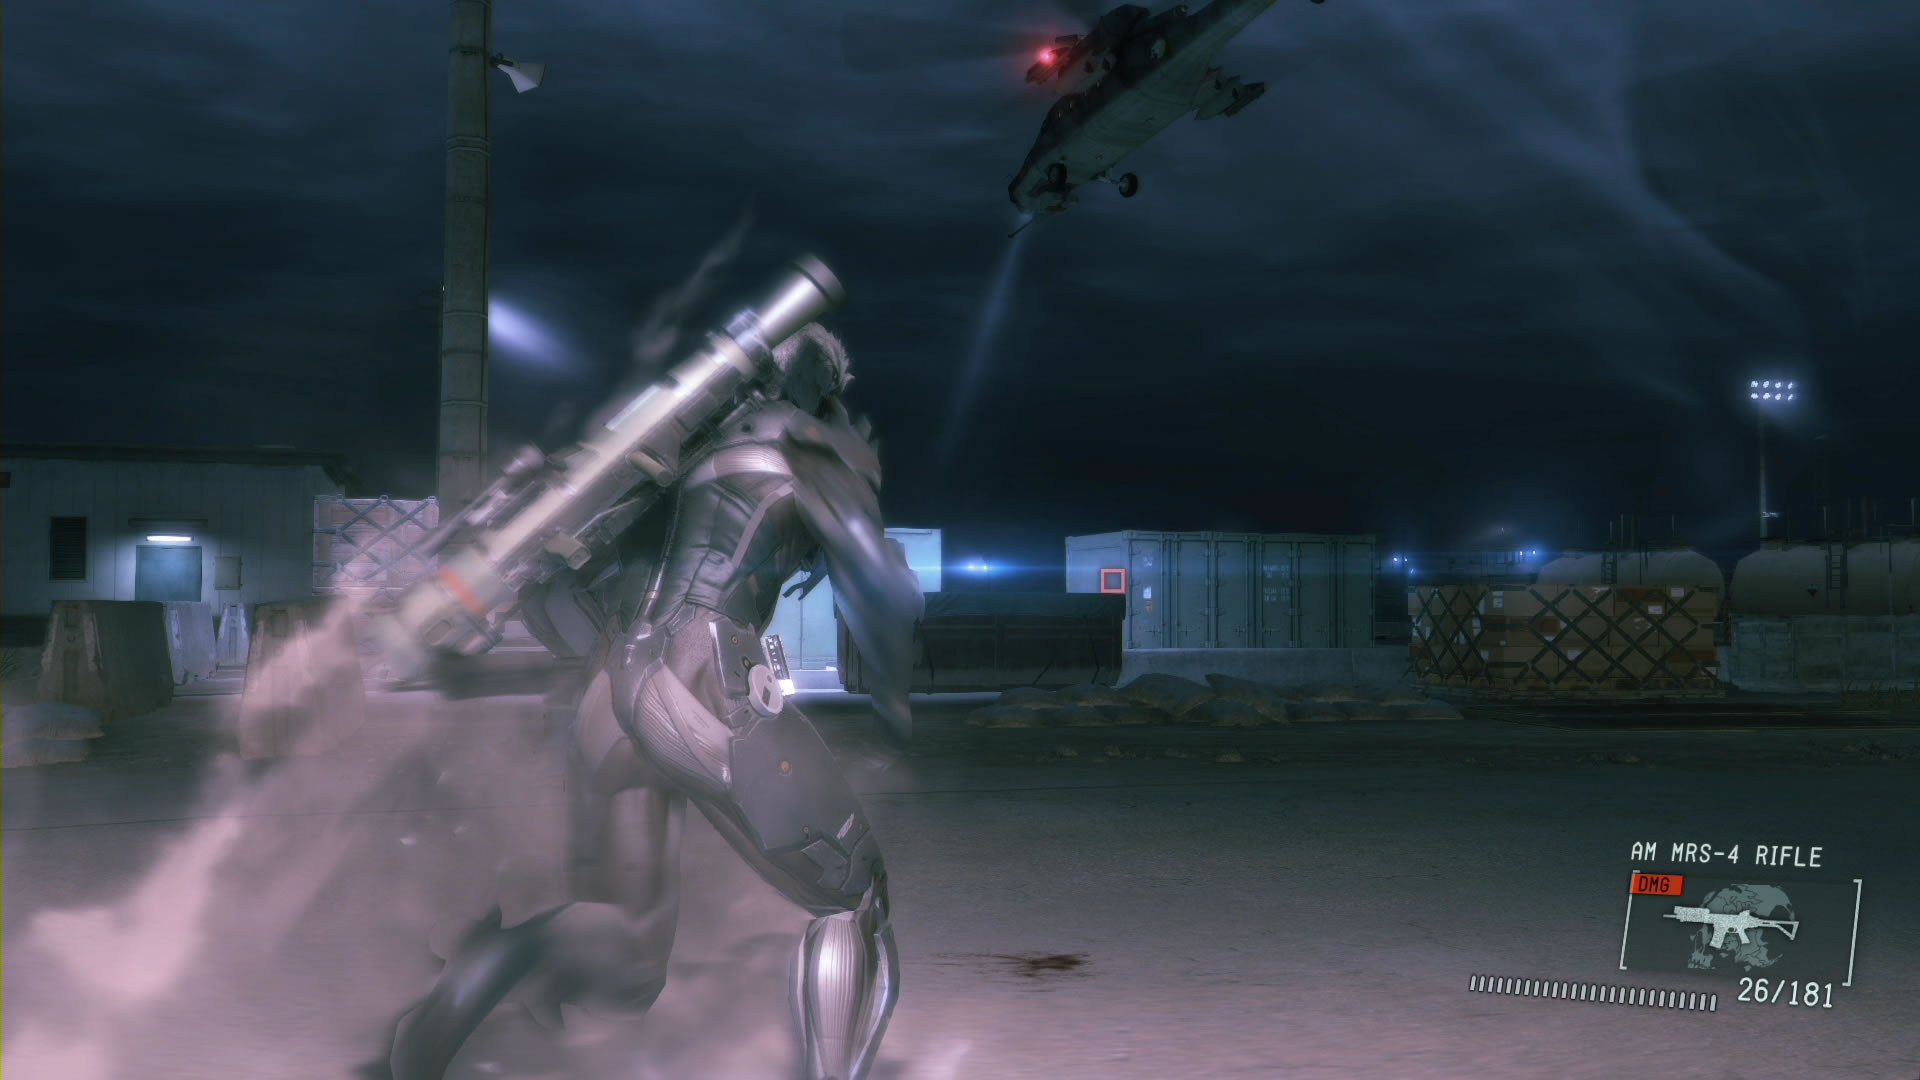 Metal Gear Solid V : Ground Zeroes sortira le 20 mars 2014